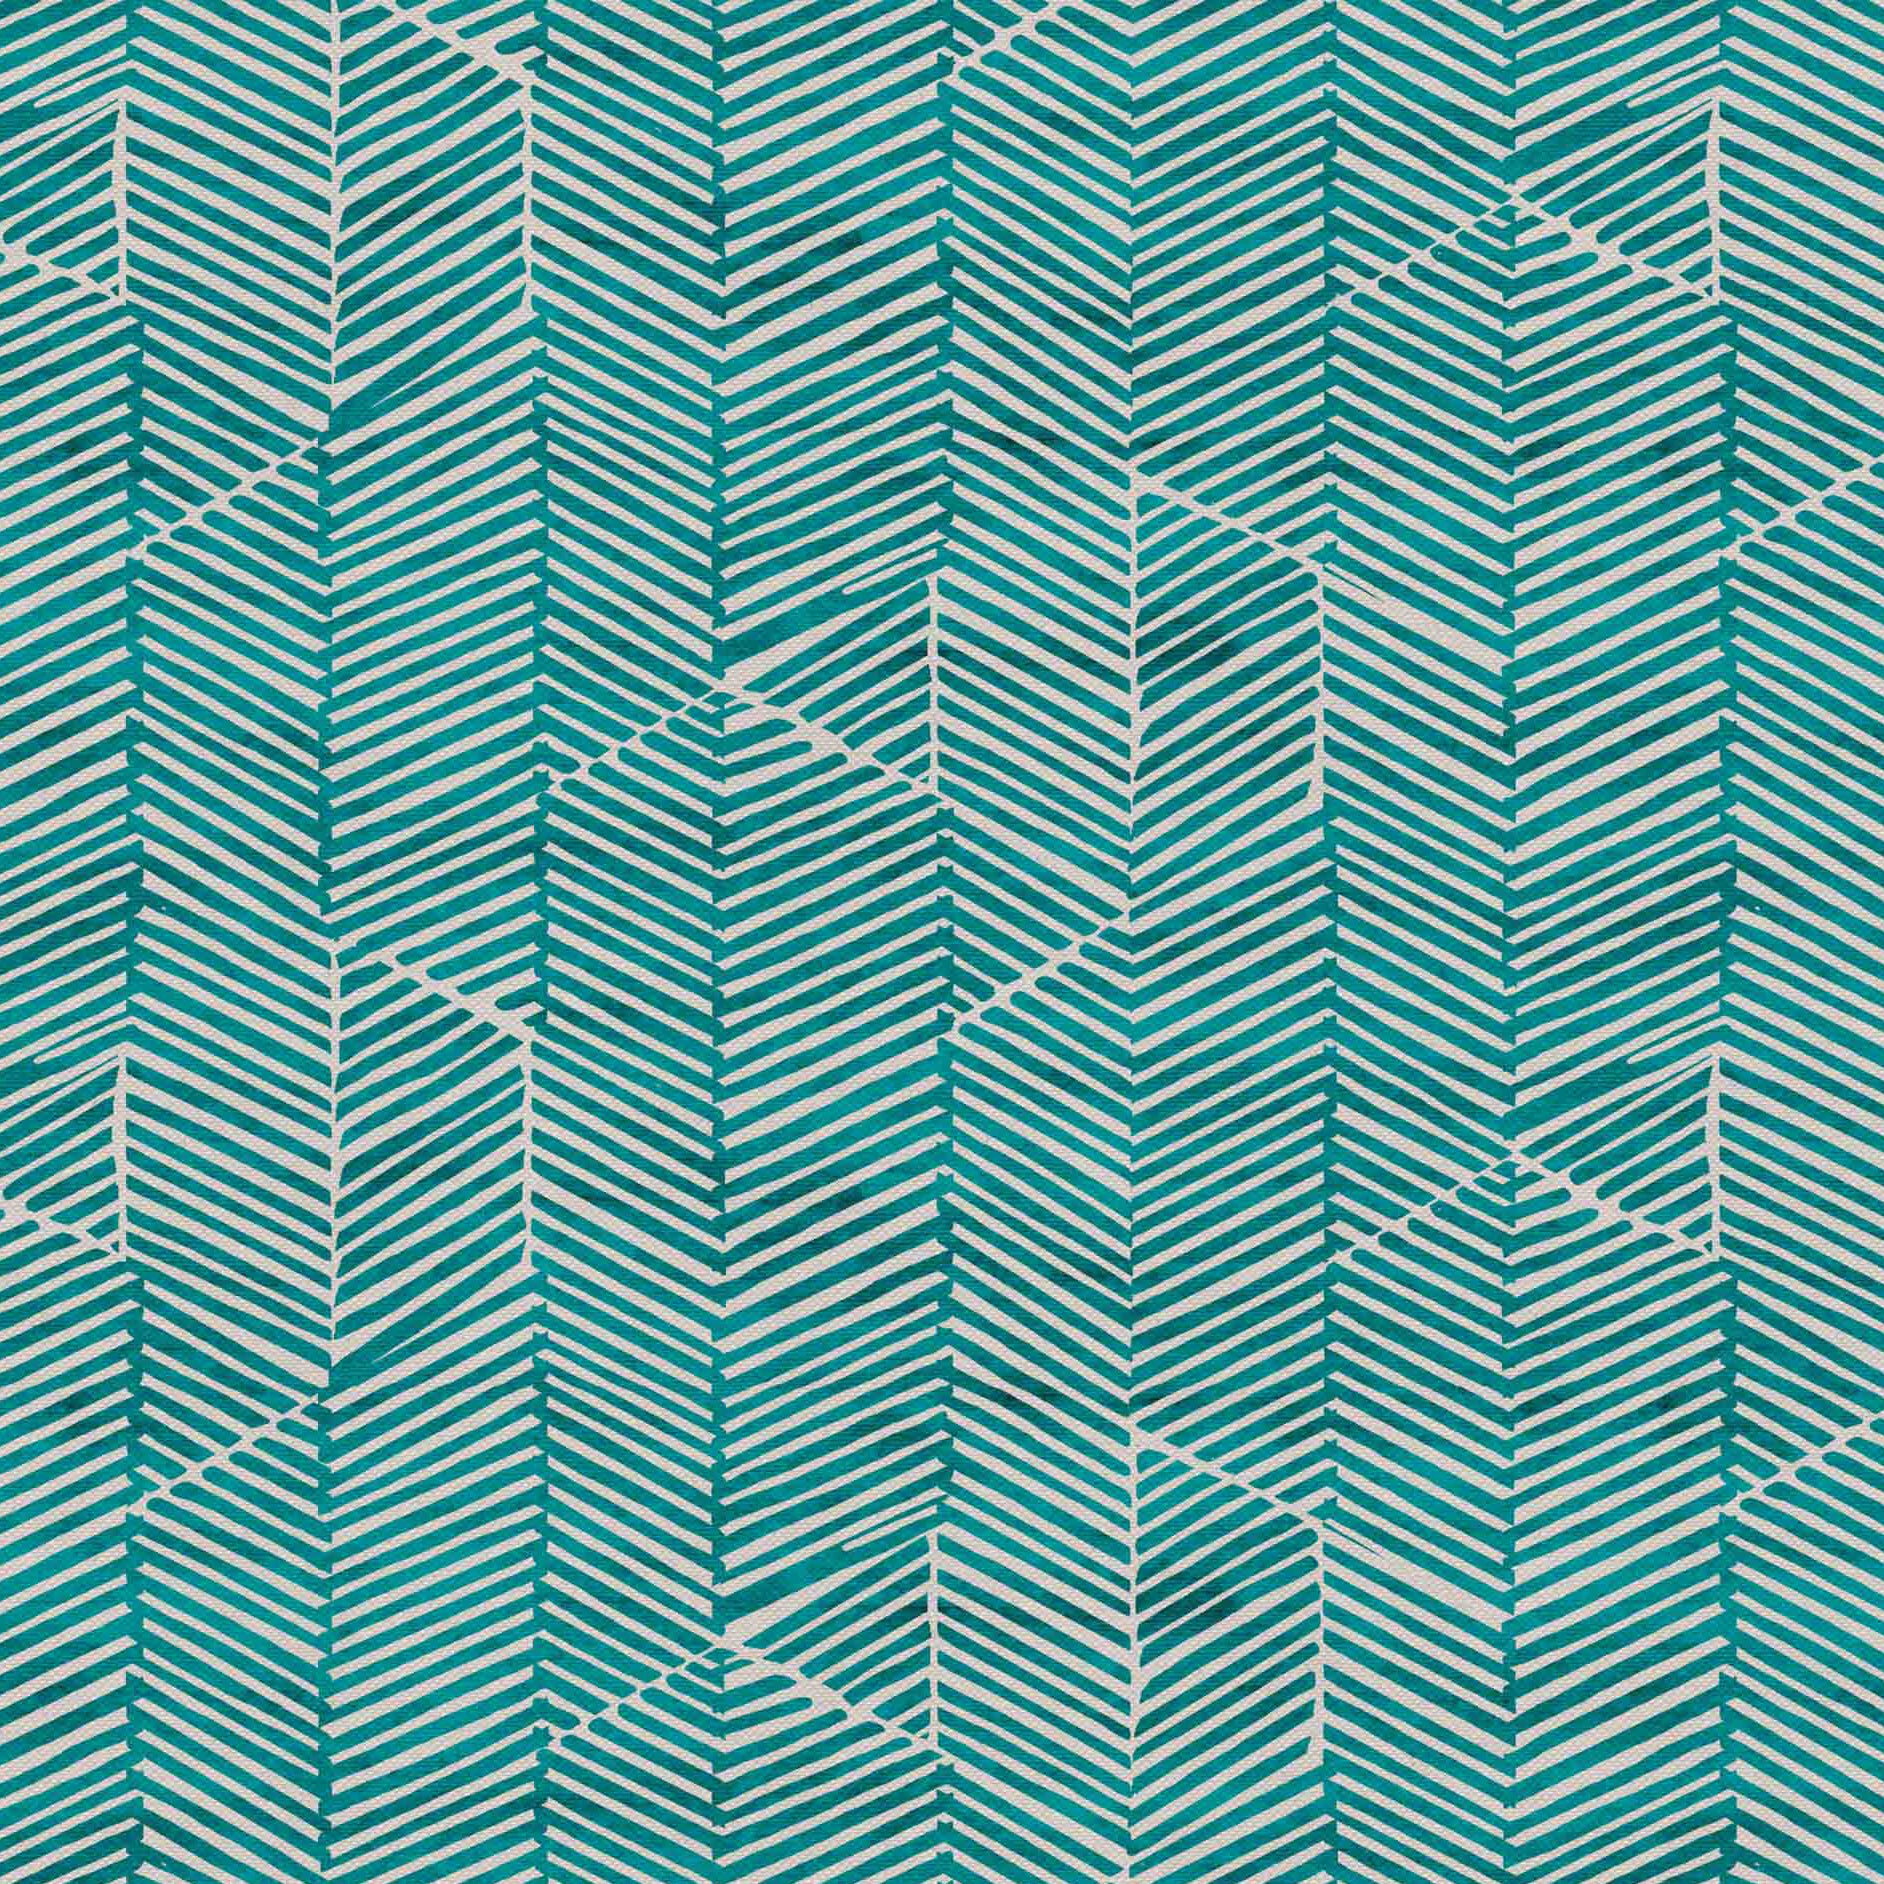 Detail of fabric in a dense herringbone print in turquoise on a tan field.